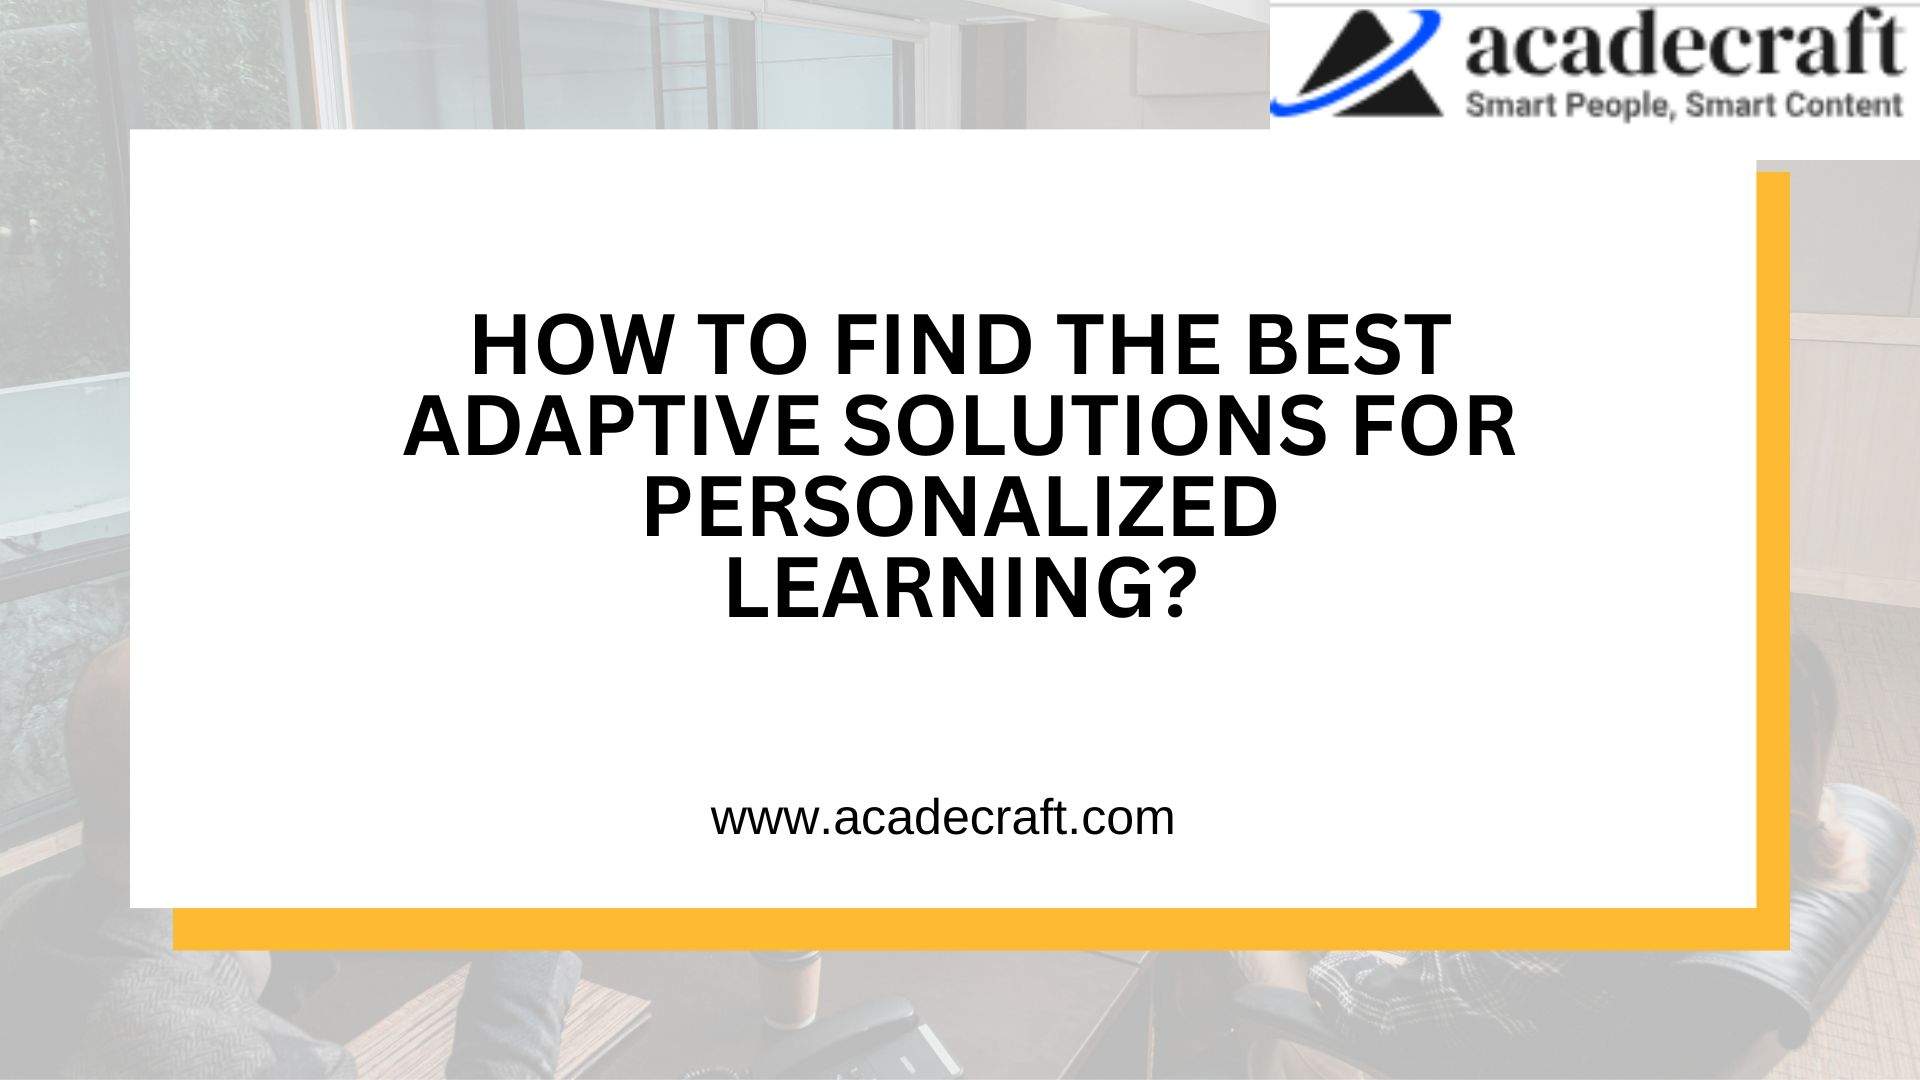 How to Find the Best Adaptive Solutions for Personalized Learning?